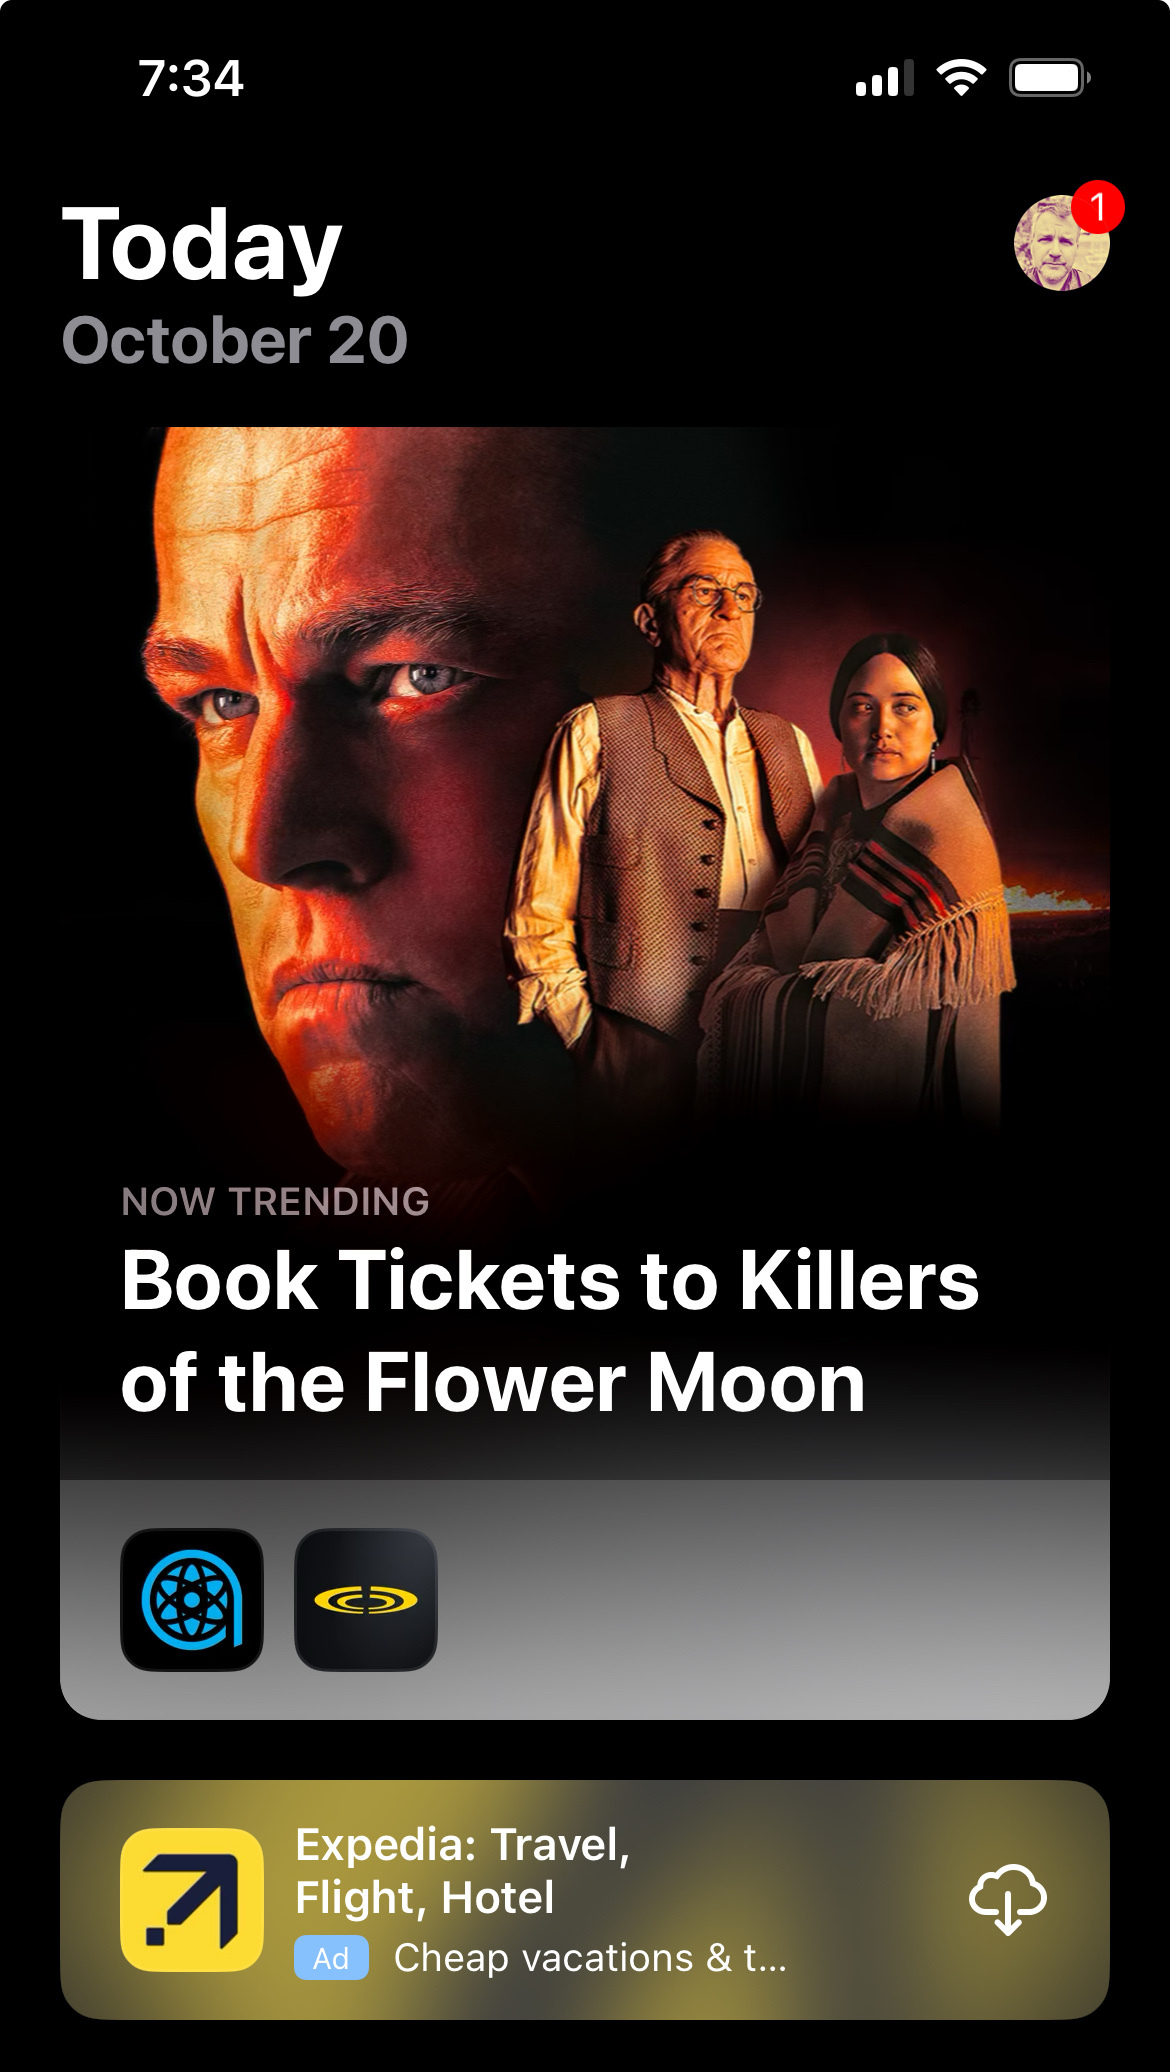 Apple App Store screenshot showing the first thing you see is Now Trending with an optoion to book tickets to Killers of the Flower Moon starring Leonardo Decaprio&10;